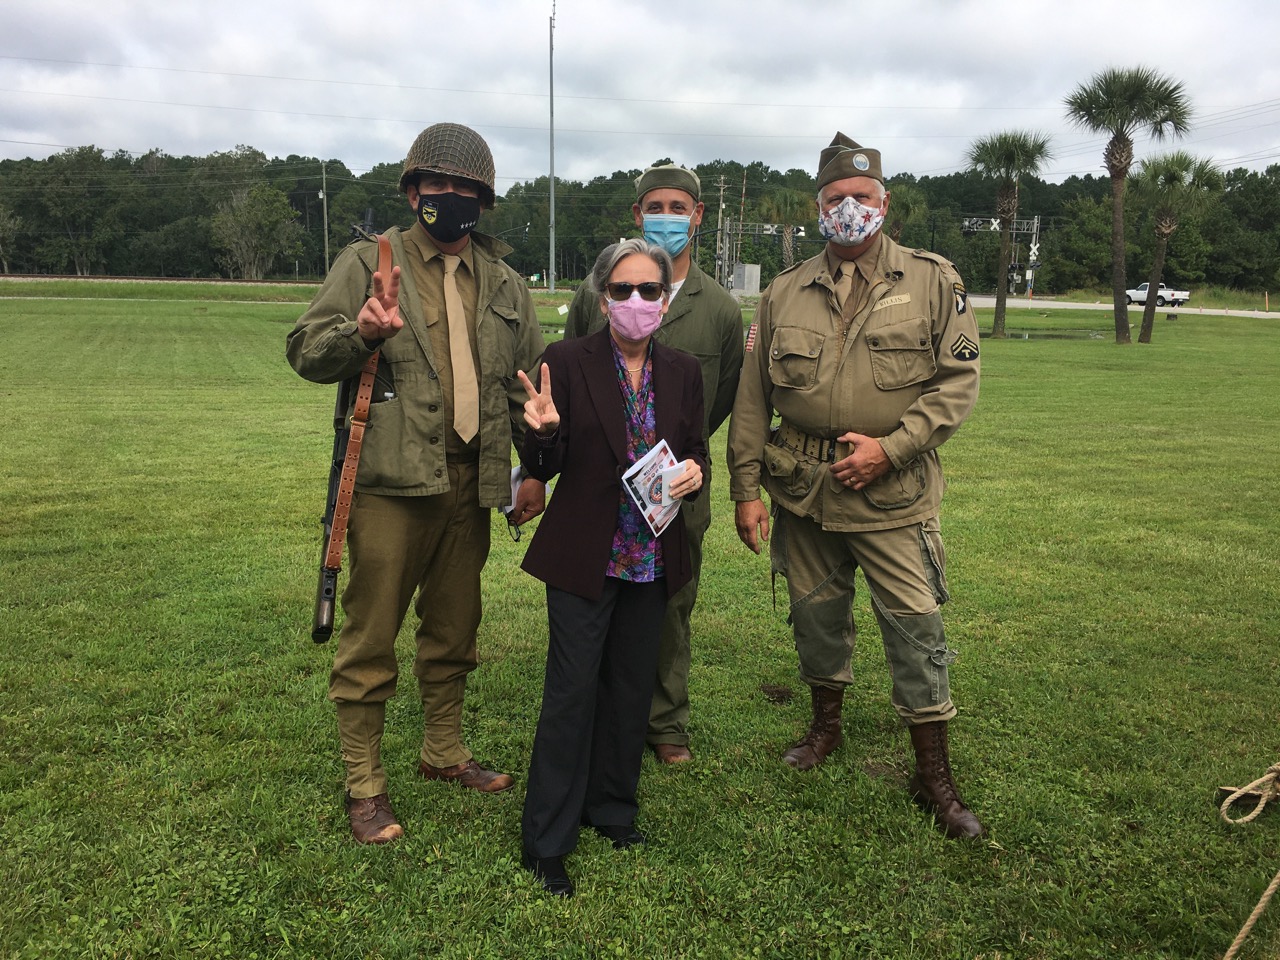 Gayla with military actors